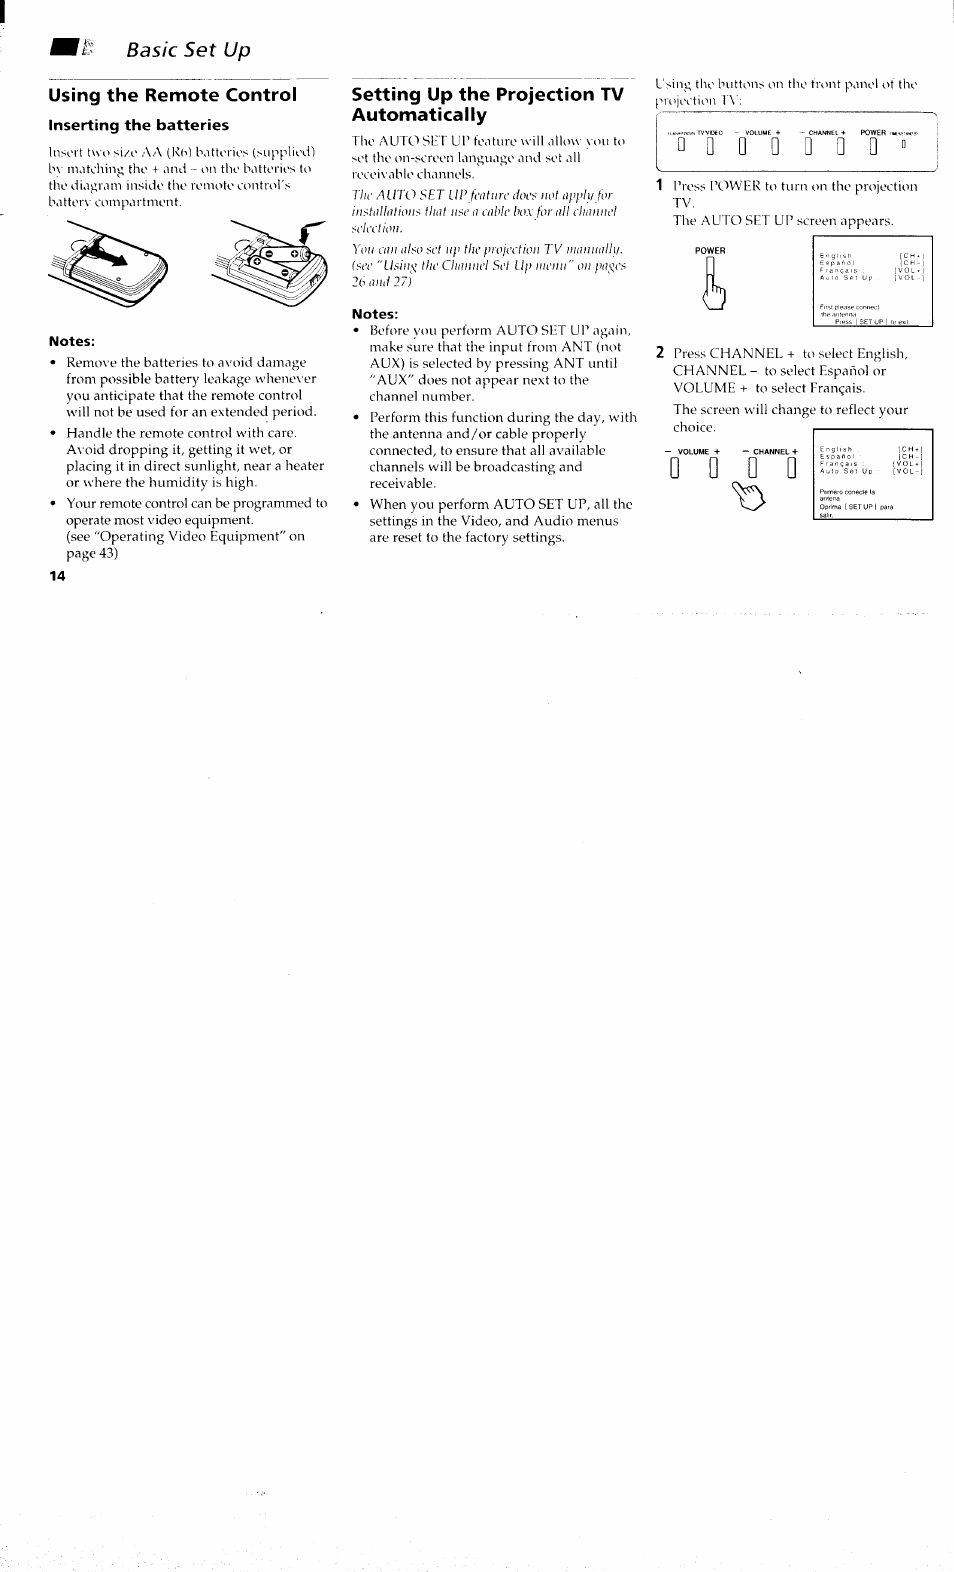 Do d o, Using the remote control, Setting up the projection tv automatically | Basic set up | Sony KP 61S70 User Manual | Page 18 / 54